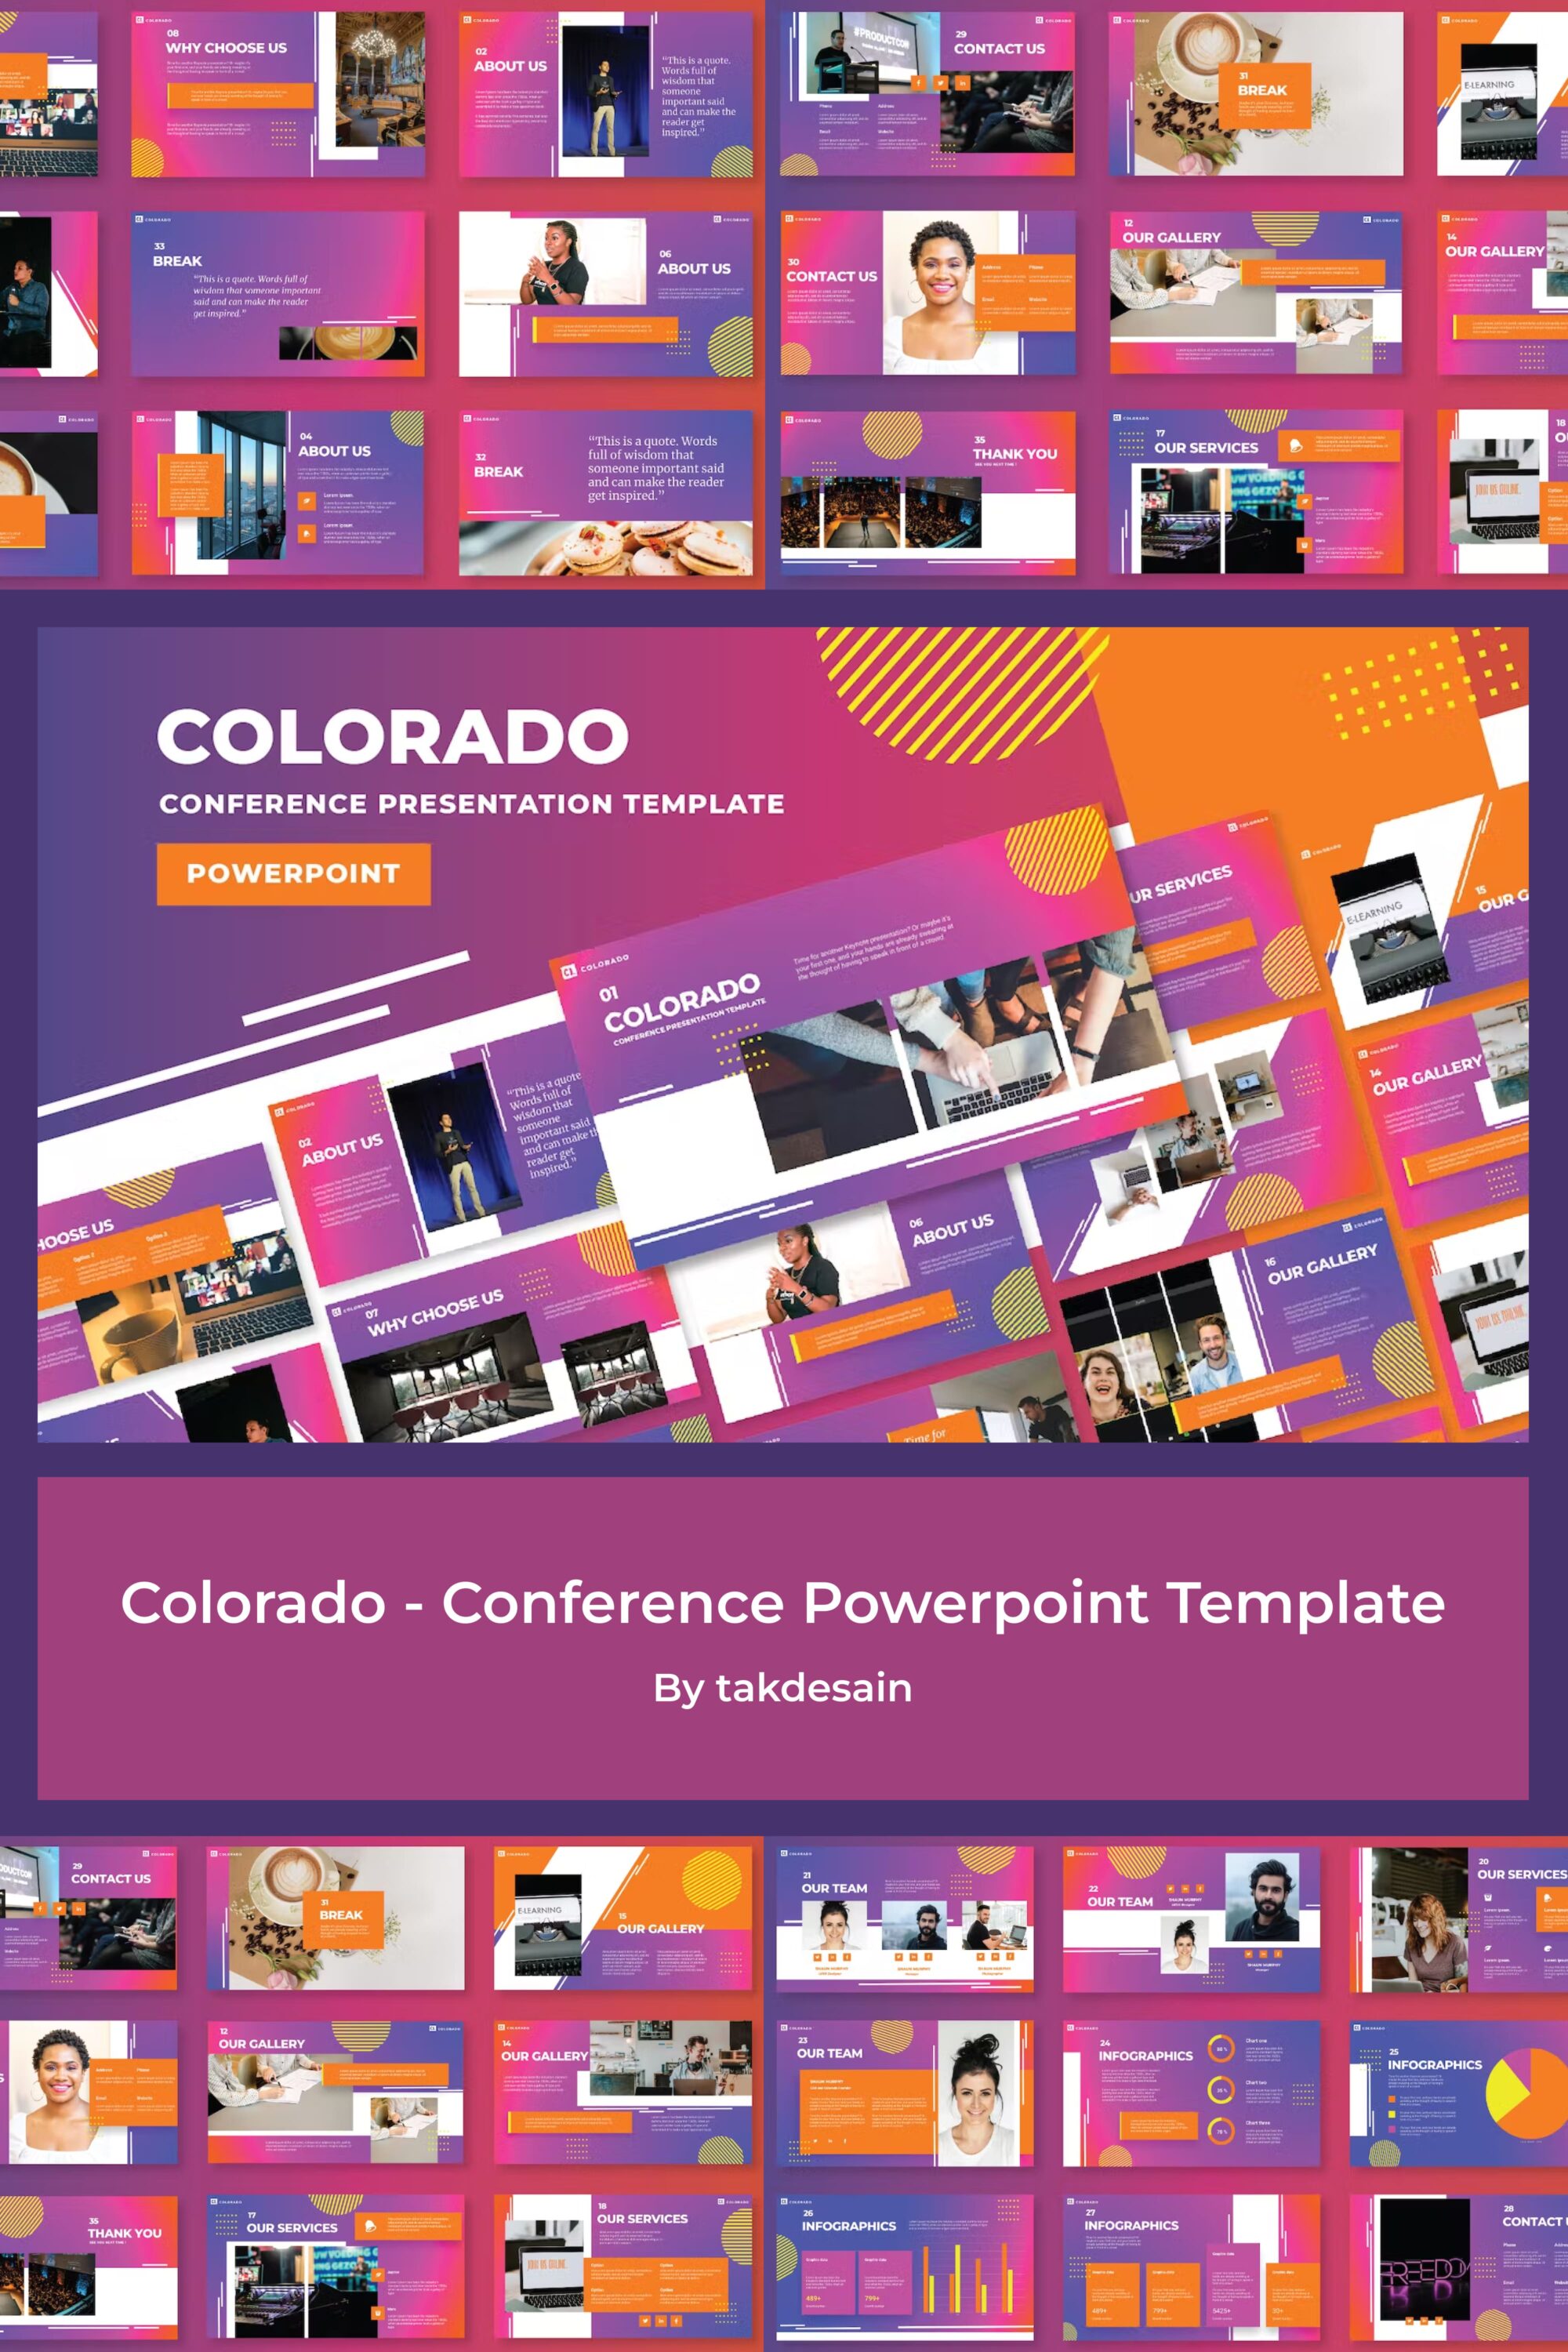 Colorado conference powerpoint template of pinterest.